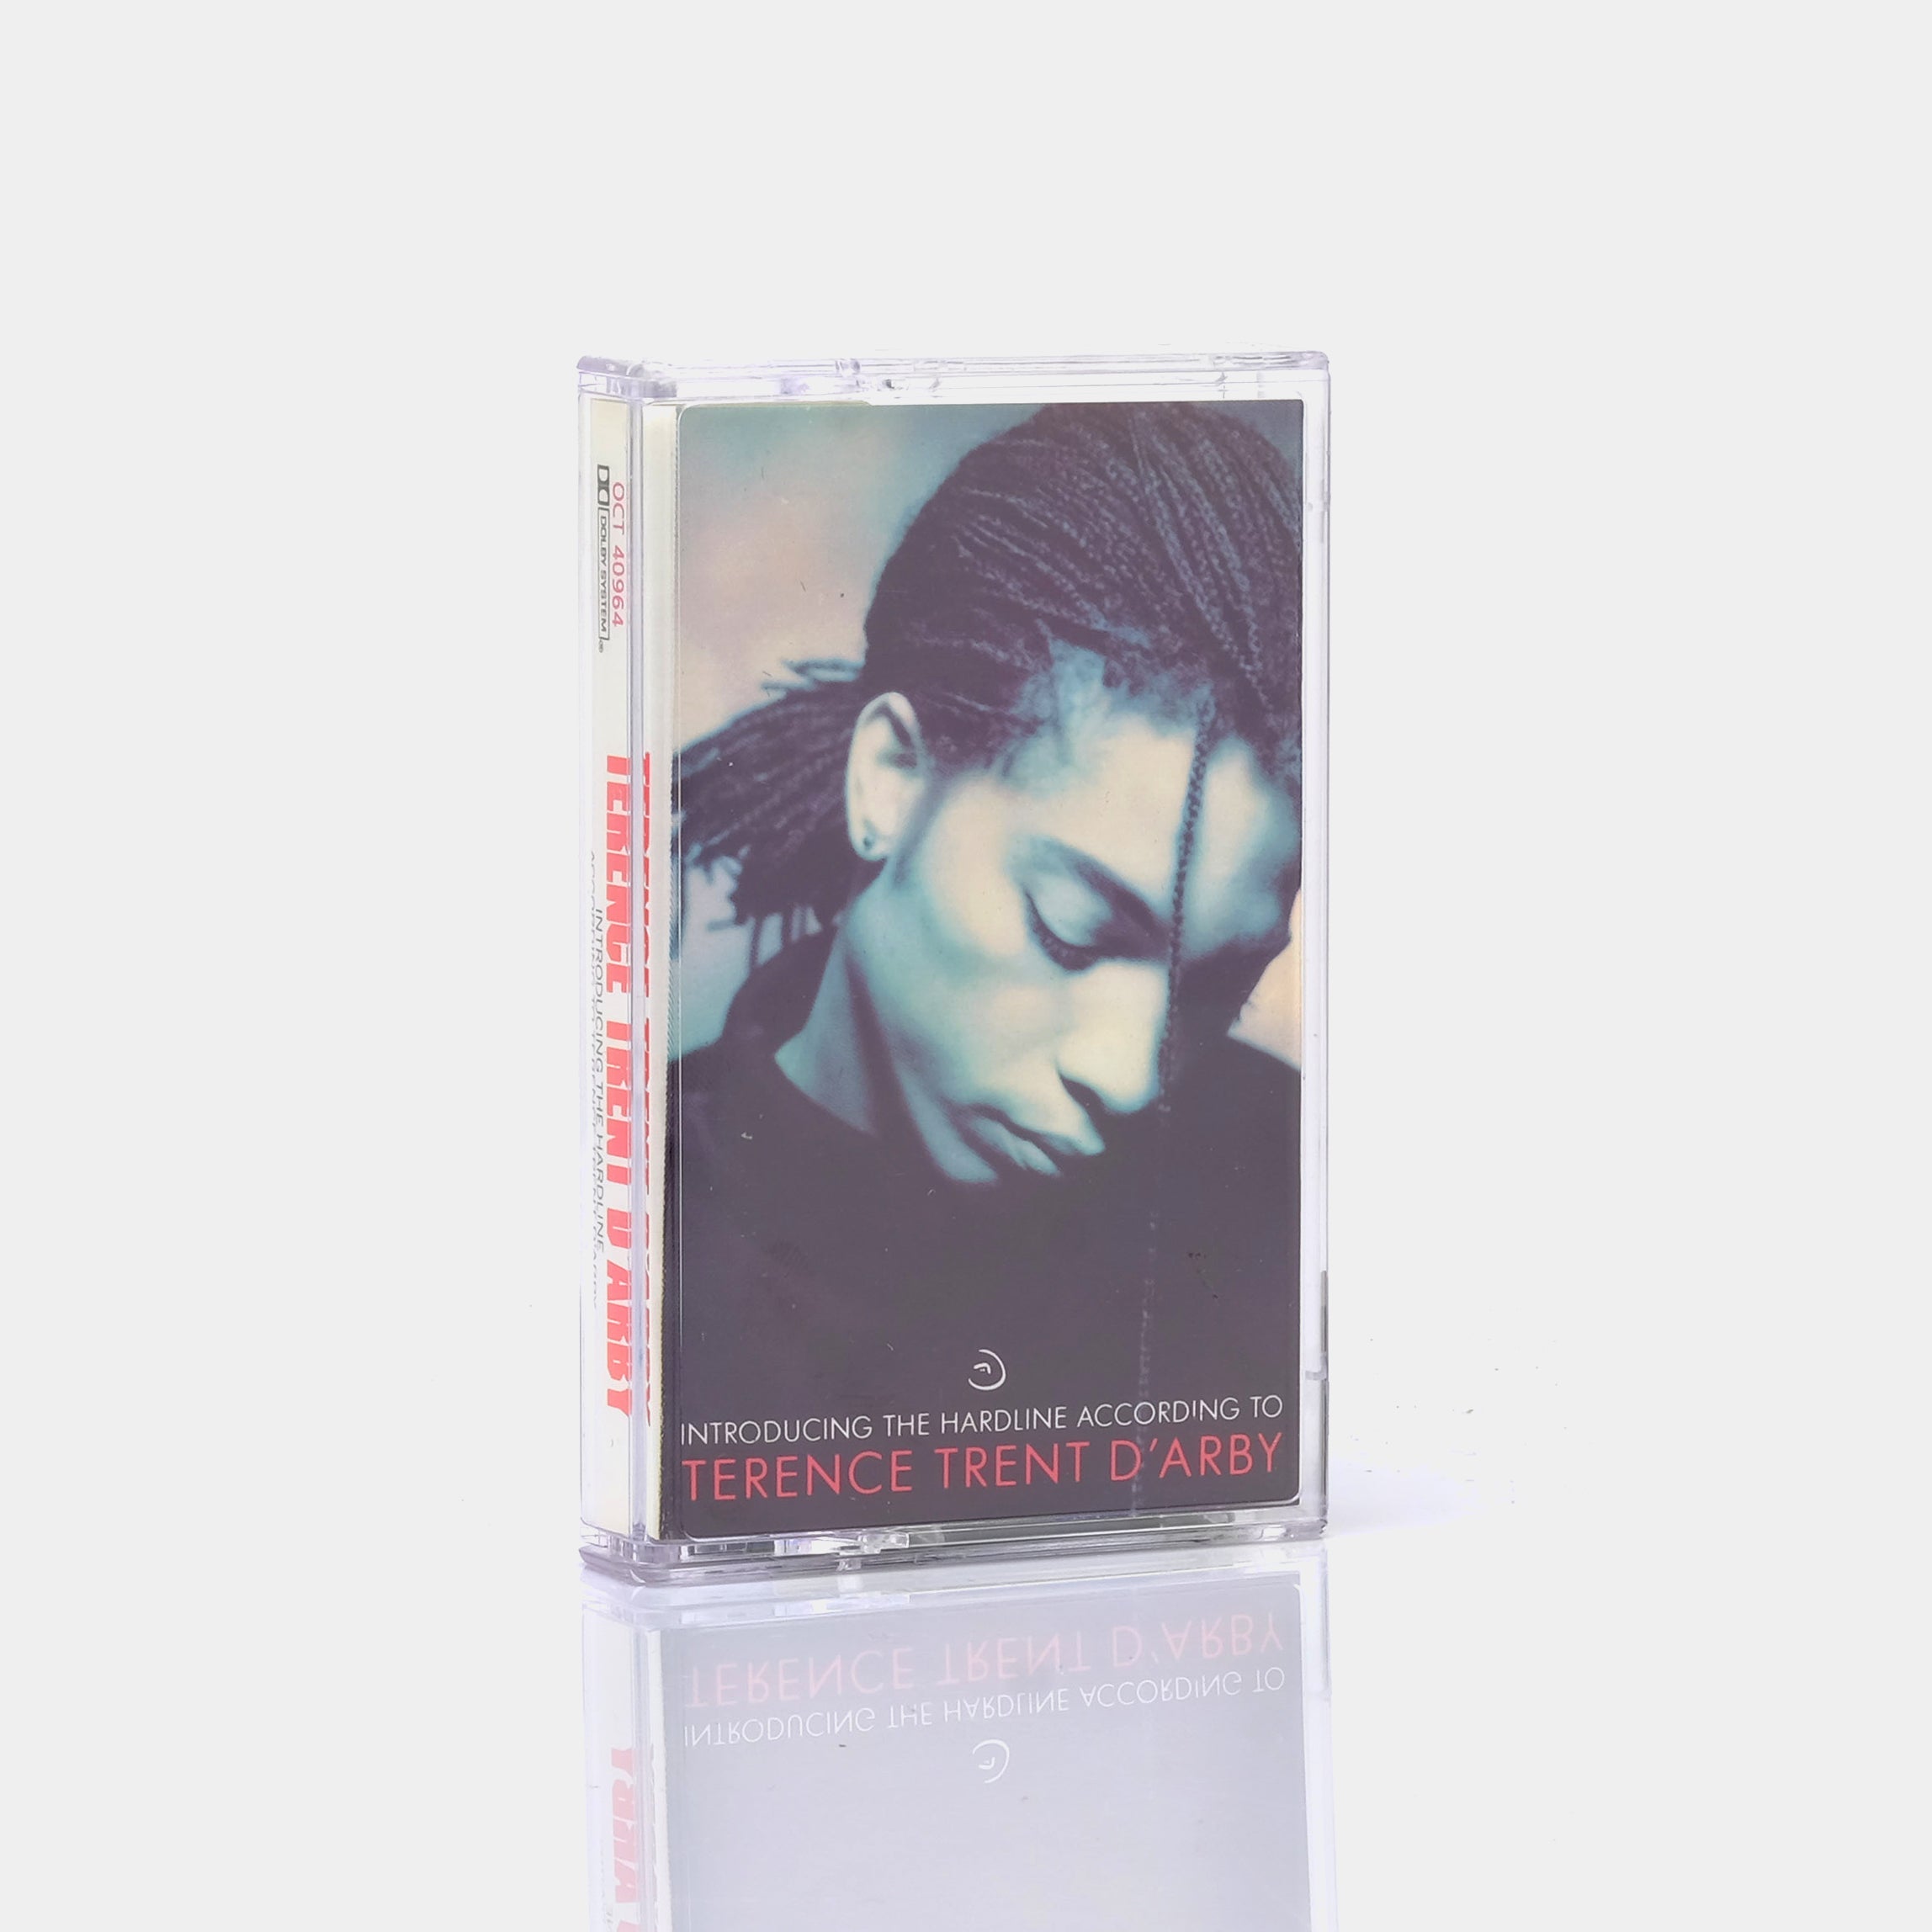 Terence Trent D'Arby - Introducing The Hardline According To Terrence Trend D'Arby Cassette Tape